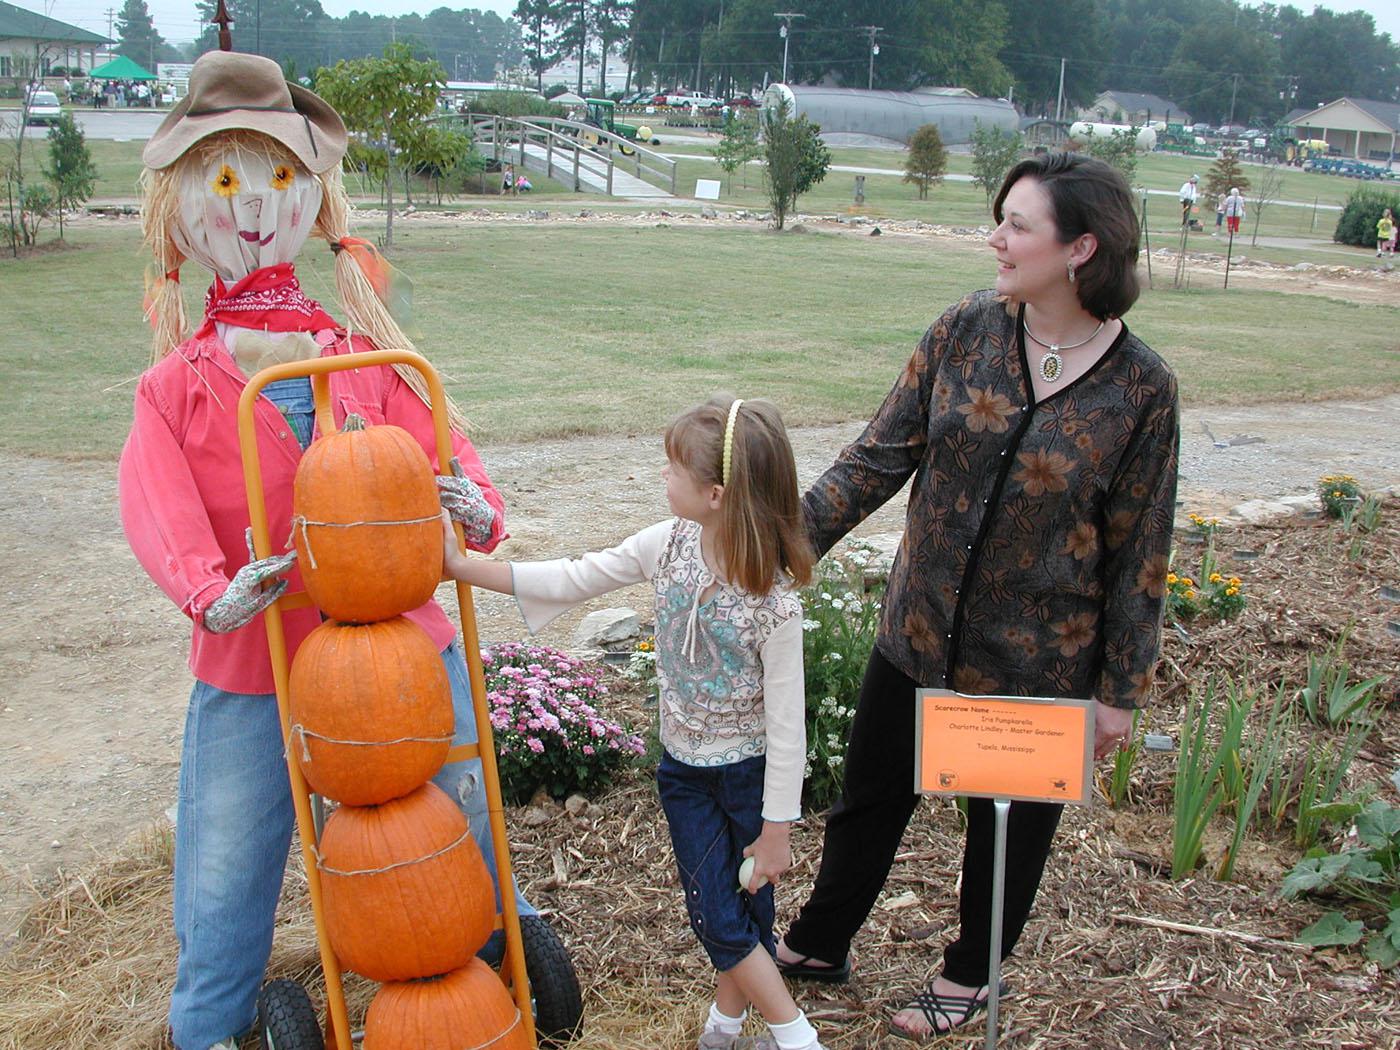 North Mississippi boasts a bumper crop of scarecrows.